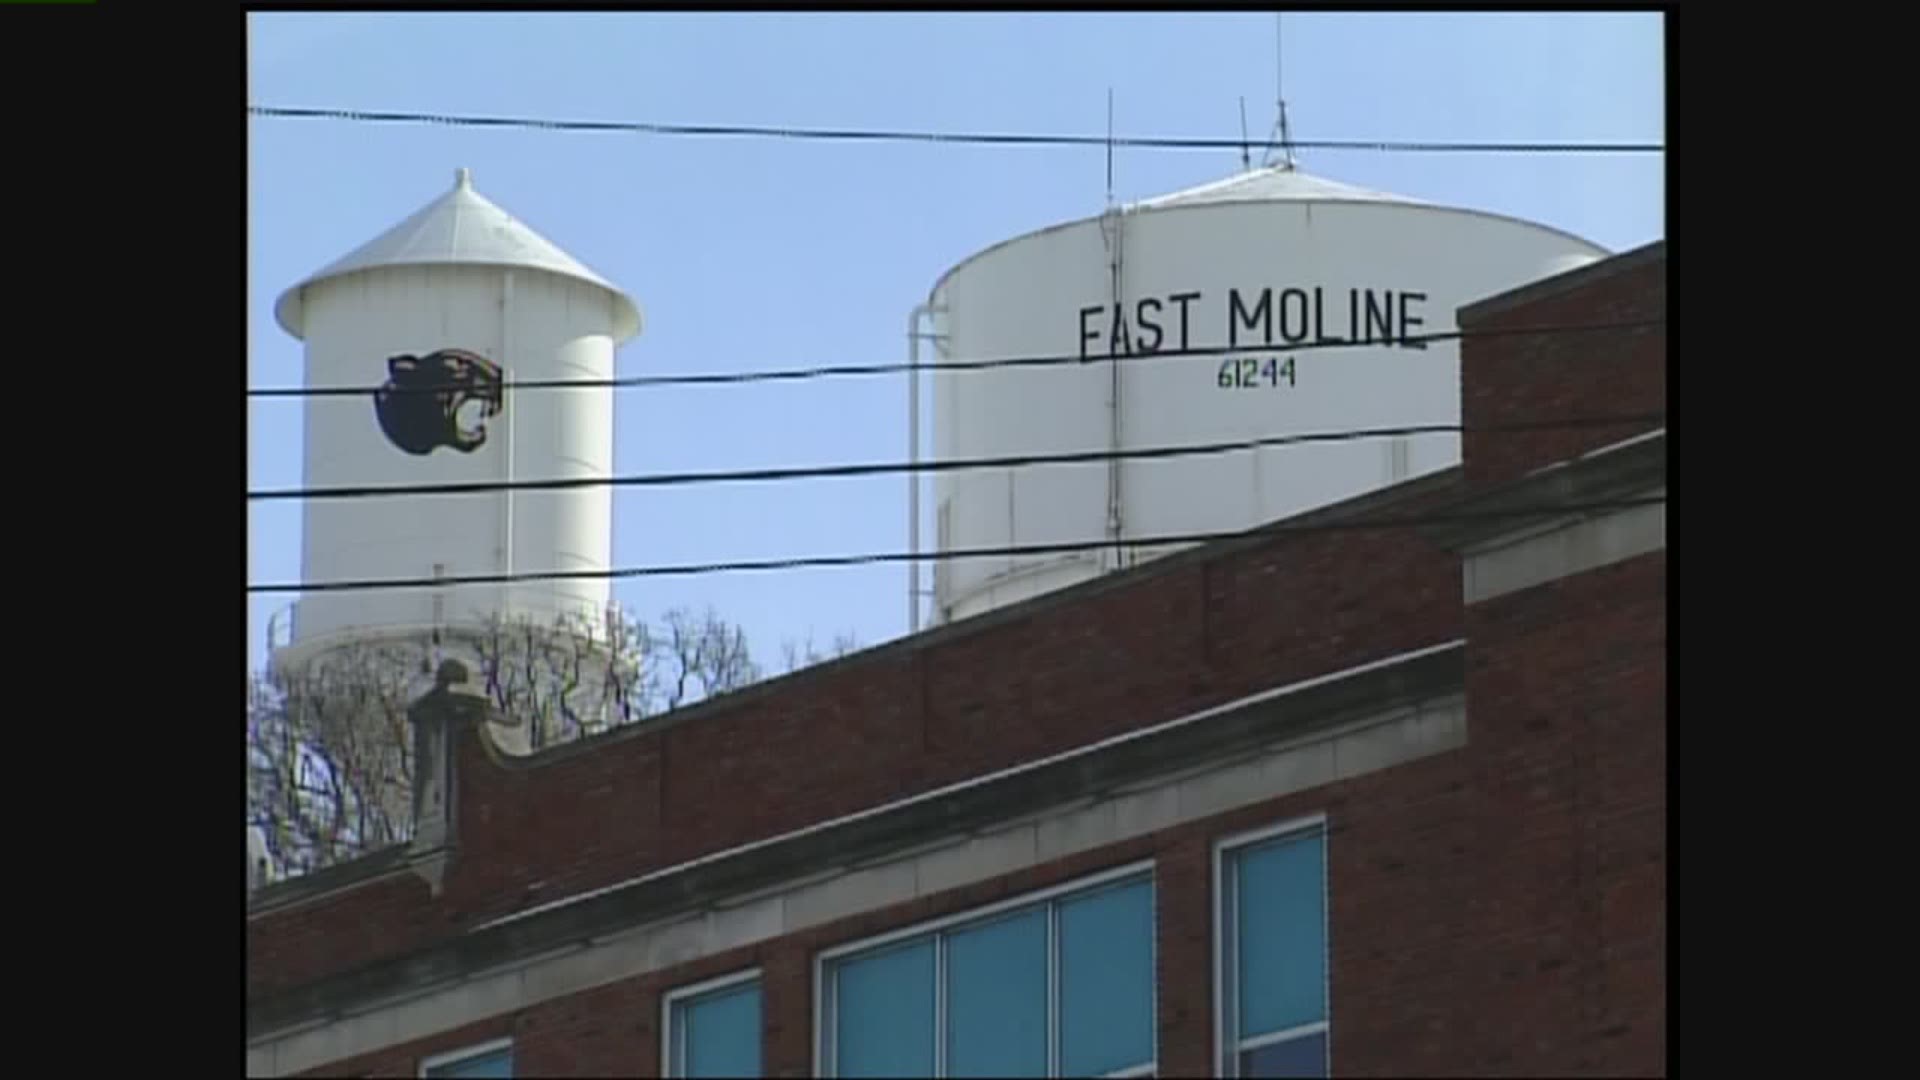 From the archives of 2000, East Moline and Moline were thinking about merging some of their services.